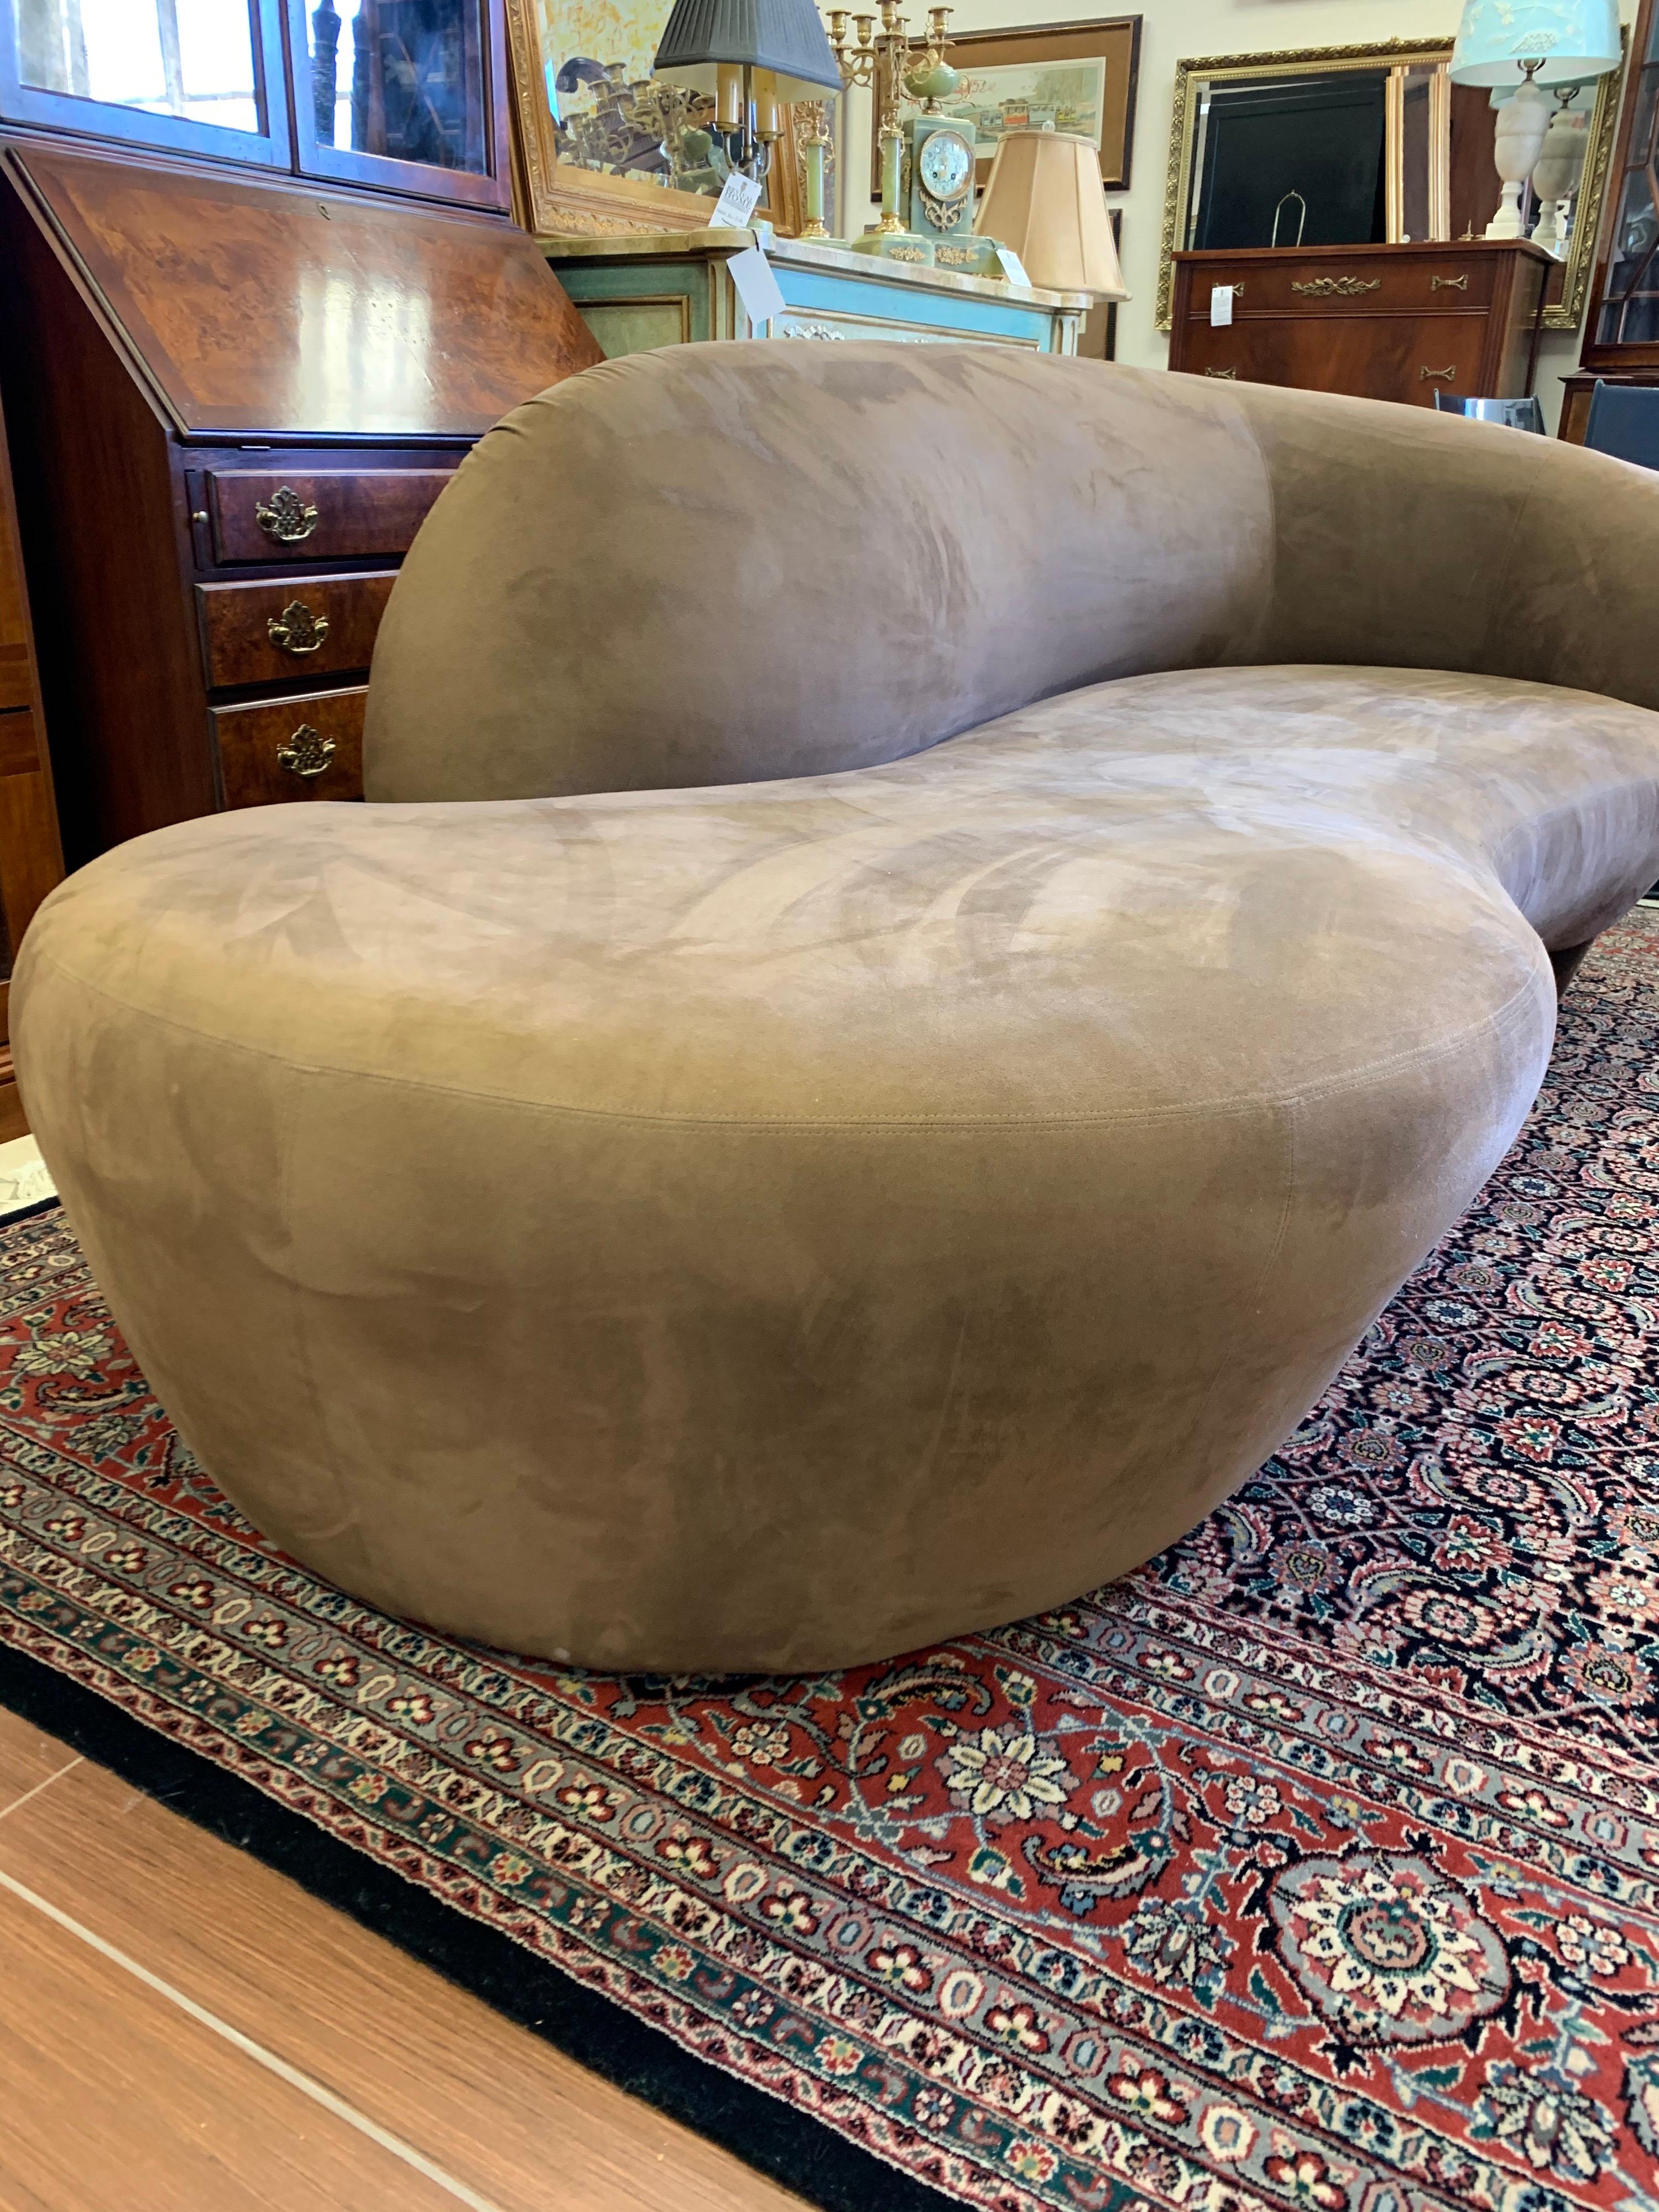 Late 20th Century Vladimir Kagan Weiman Preview Chaise Lounge Longue Sofa Chocolate Brown Suede